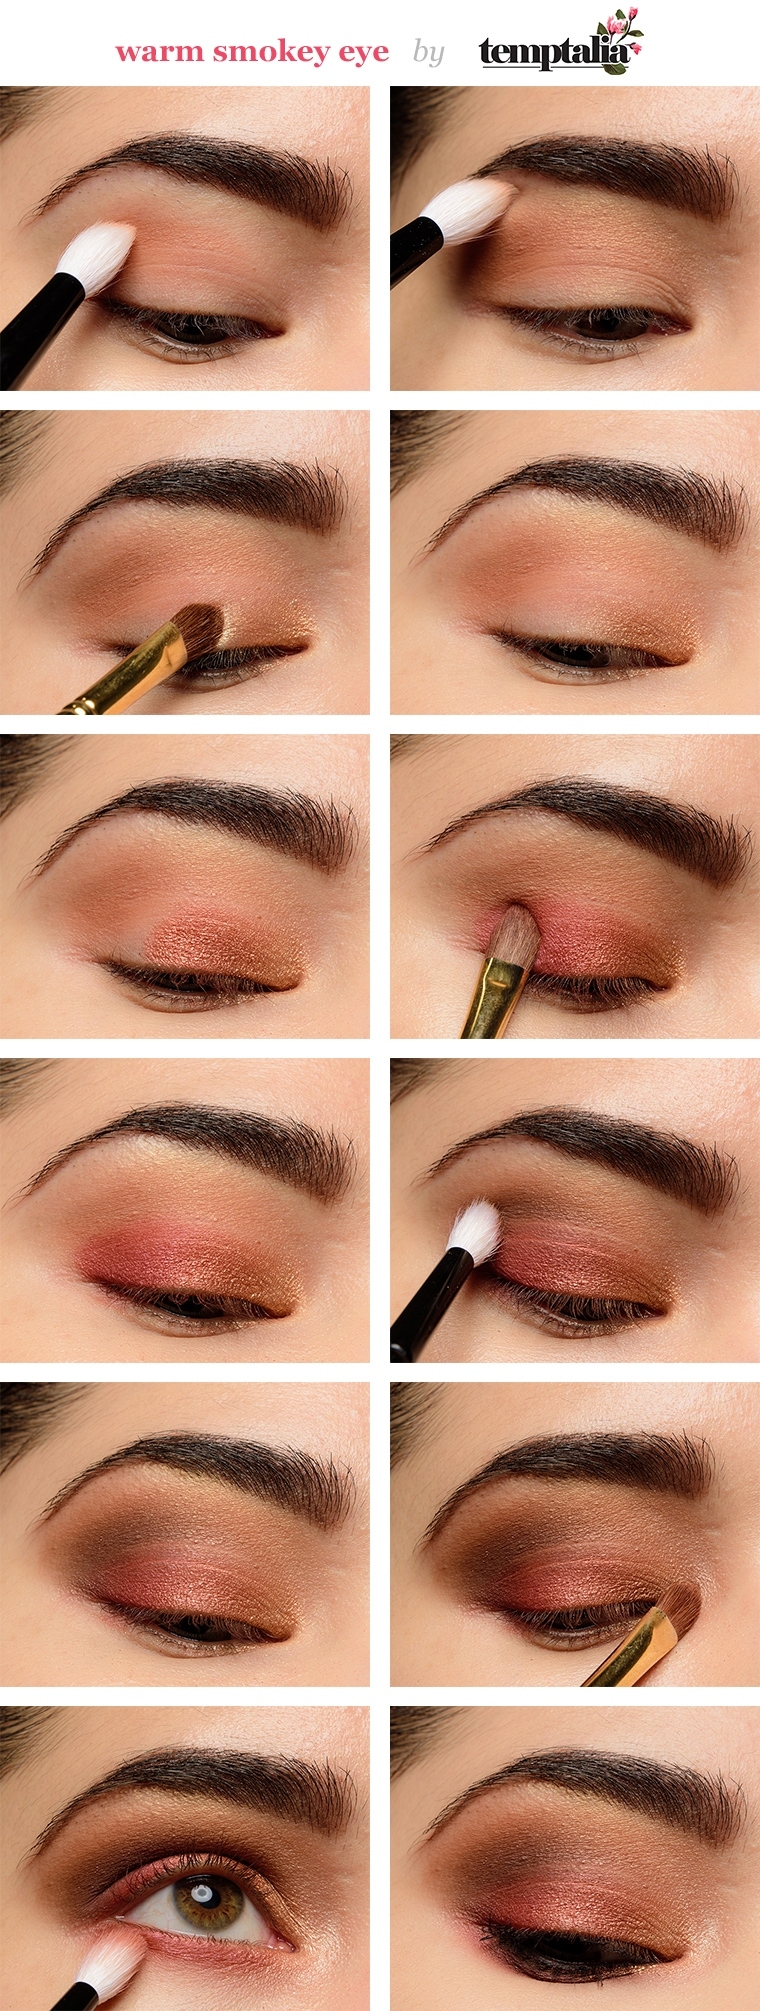 How To Apply Eyeshadow: Smokey Eye Makeup Tutorial For Beginners for Smokey Eyes Makeup Step By Step With Pictures